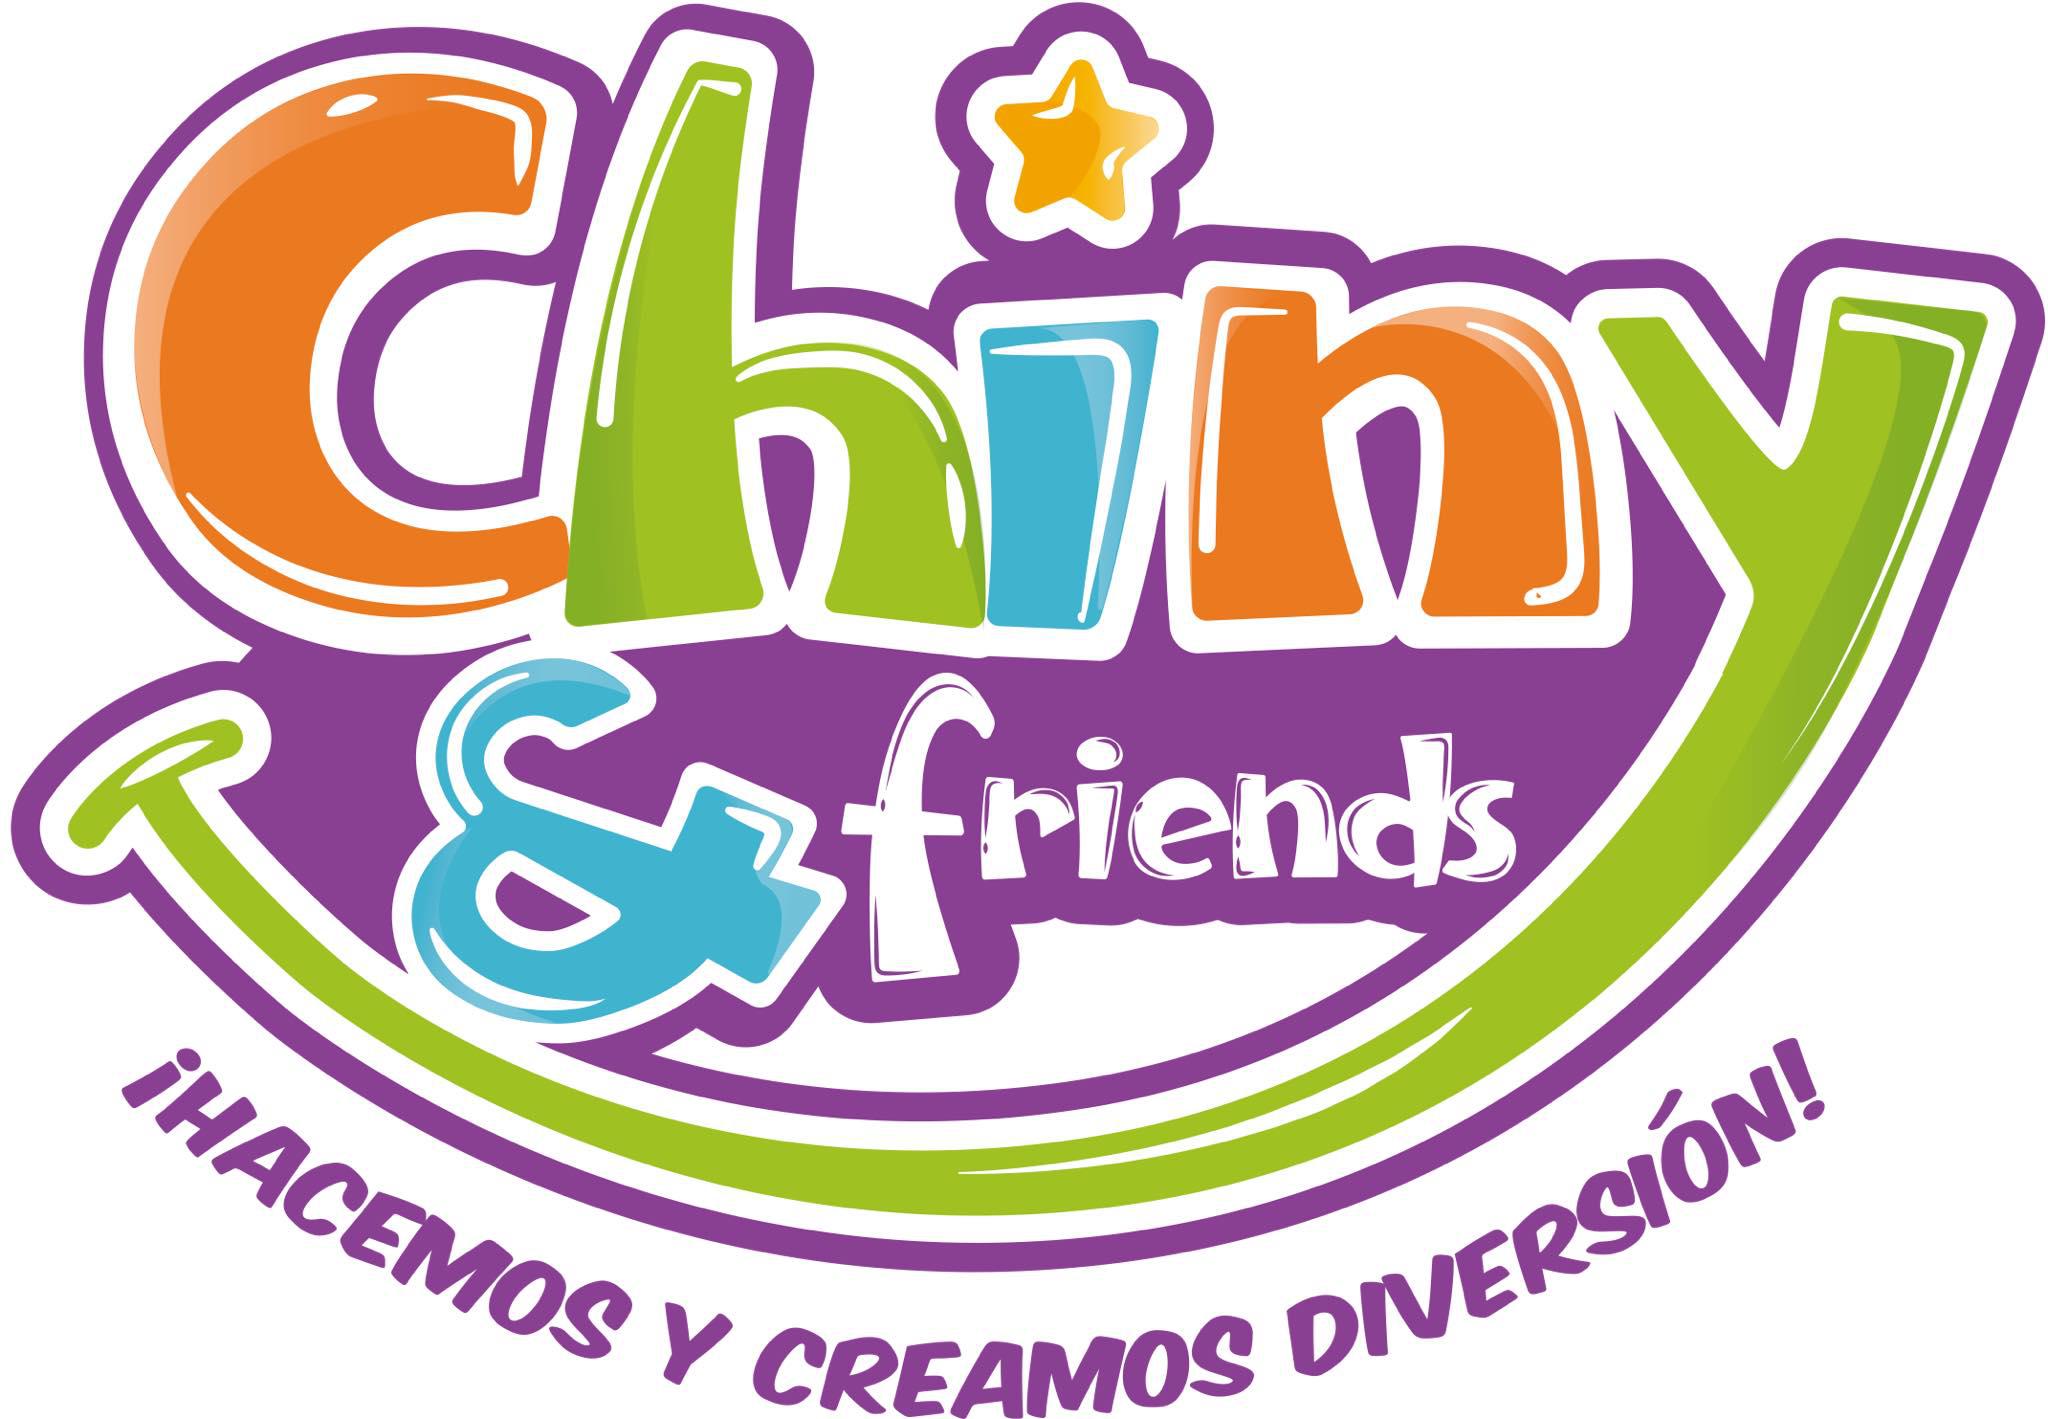  Chiny & friends